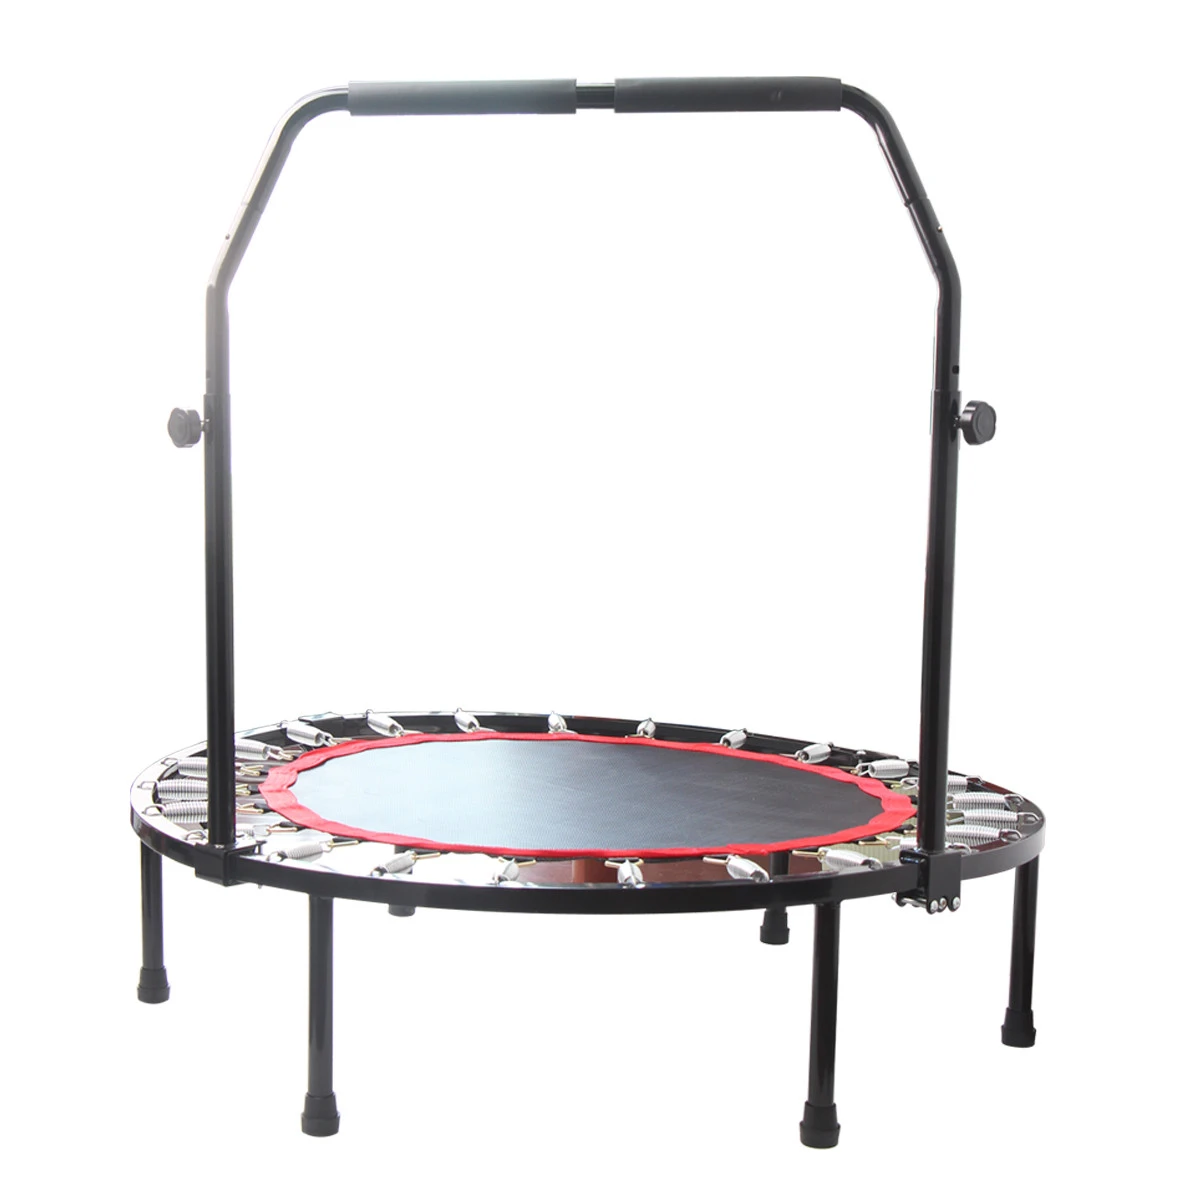 Factory Price Foldable Fitness OutdoorJumping Bungee Trampoline